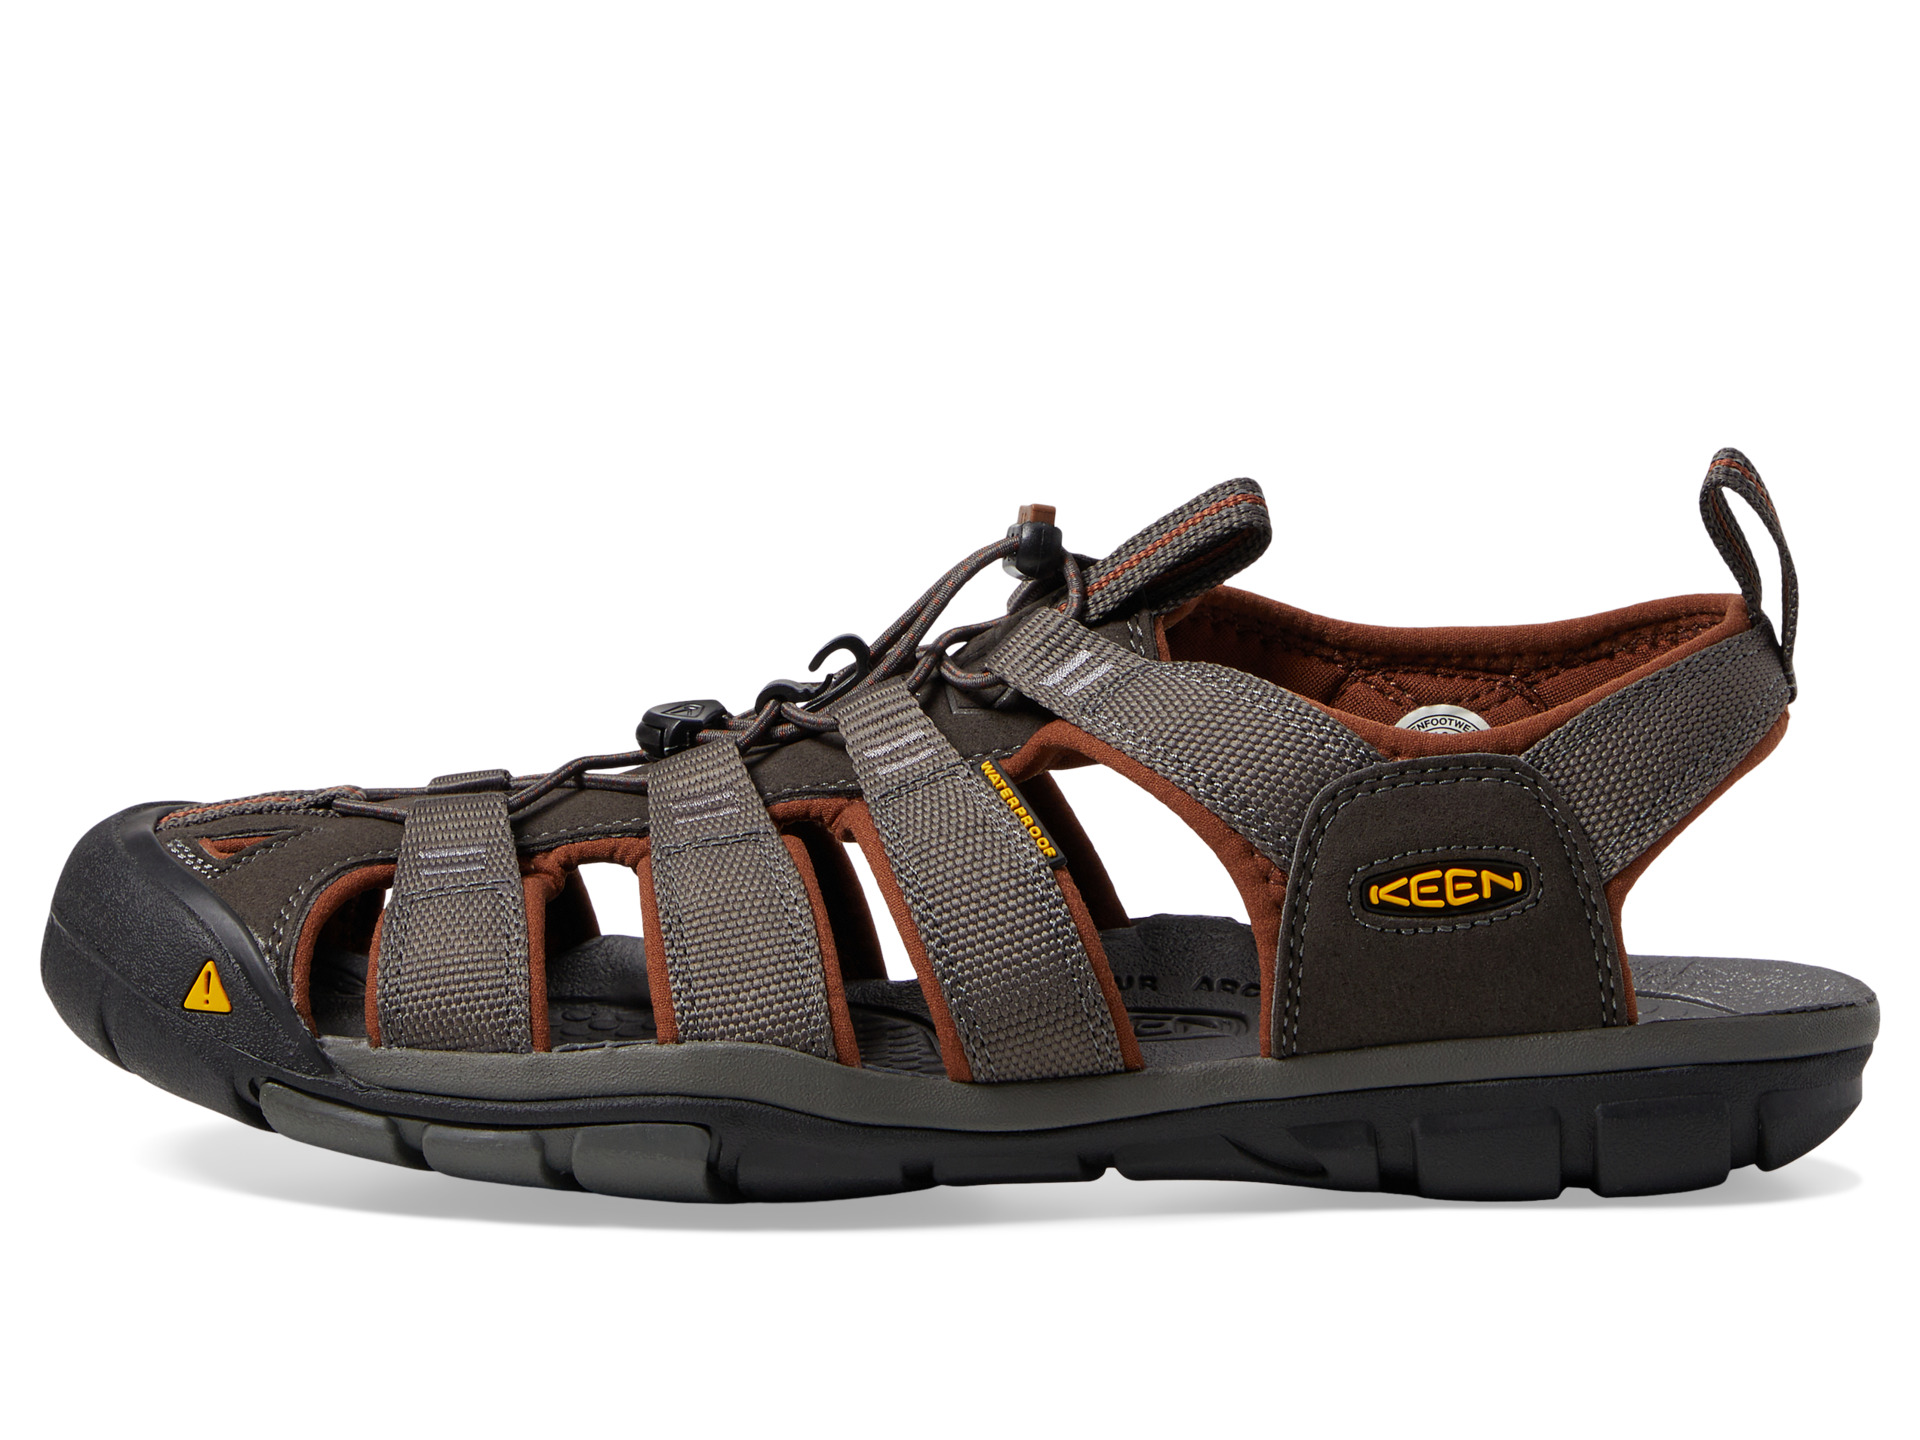 Keen Clearwater CNX - Zappos.com Free Shipping BOTH Ways